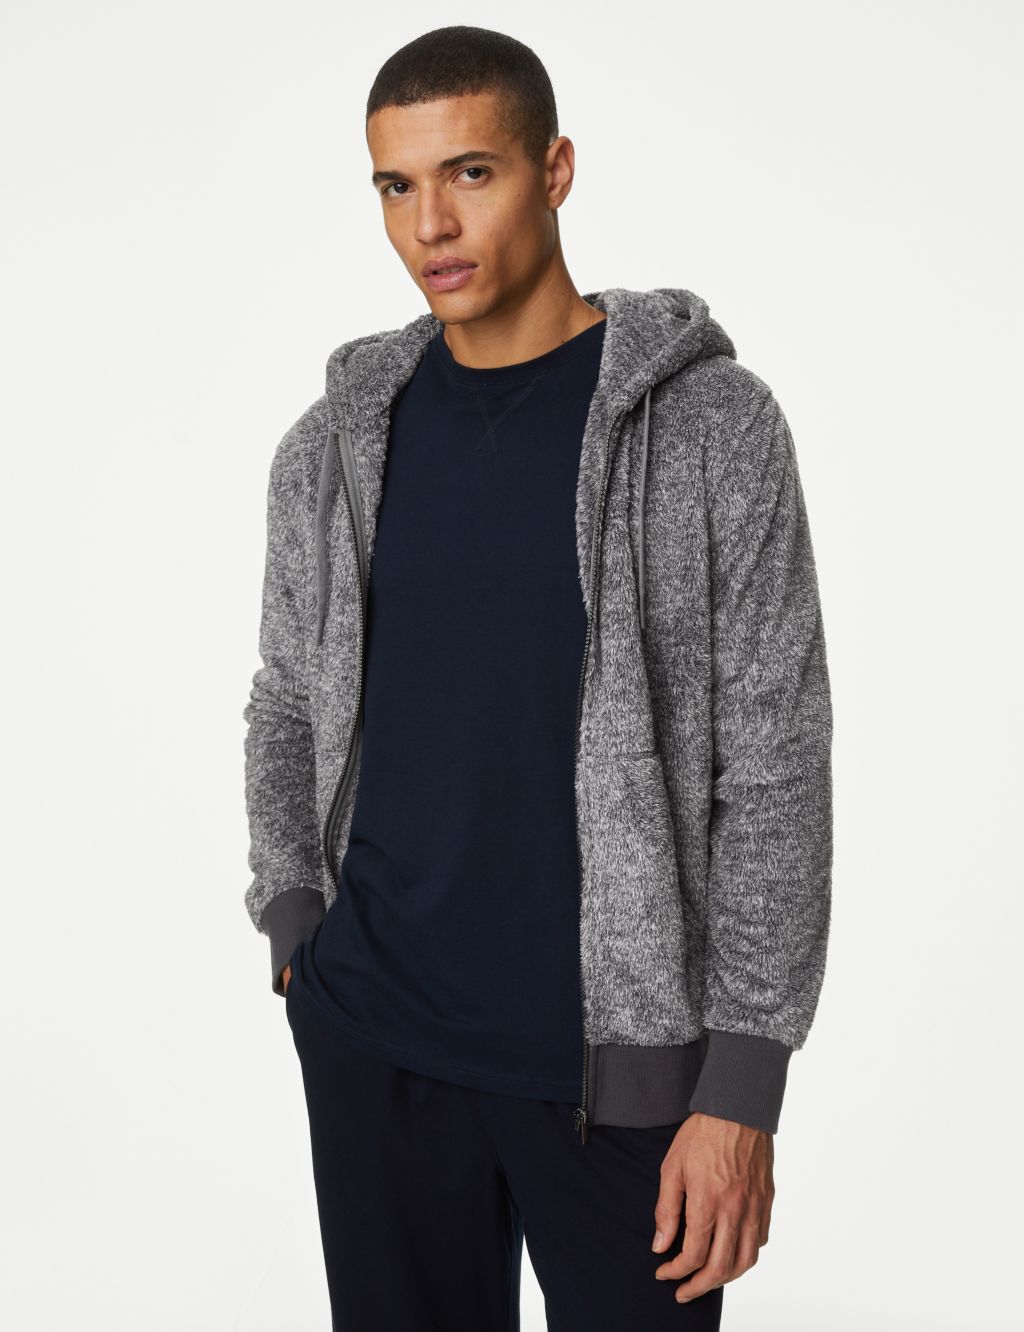 Supersoft Zip Up Hoodie | M&S Collection | M&S